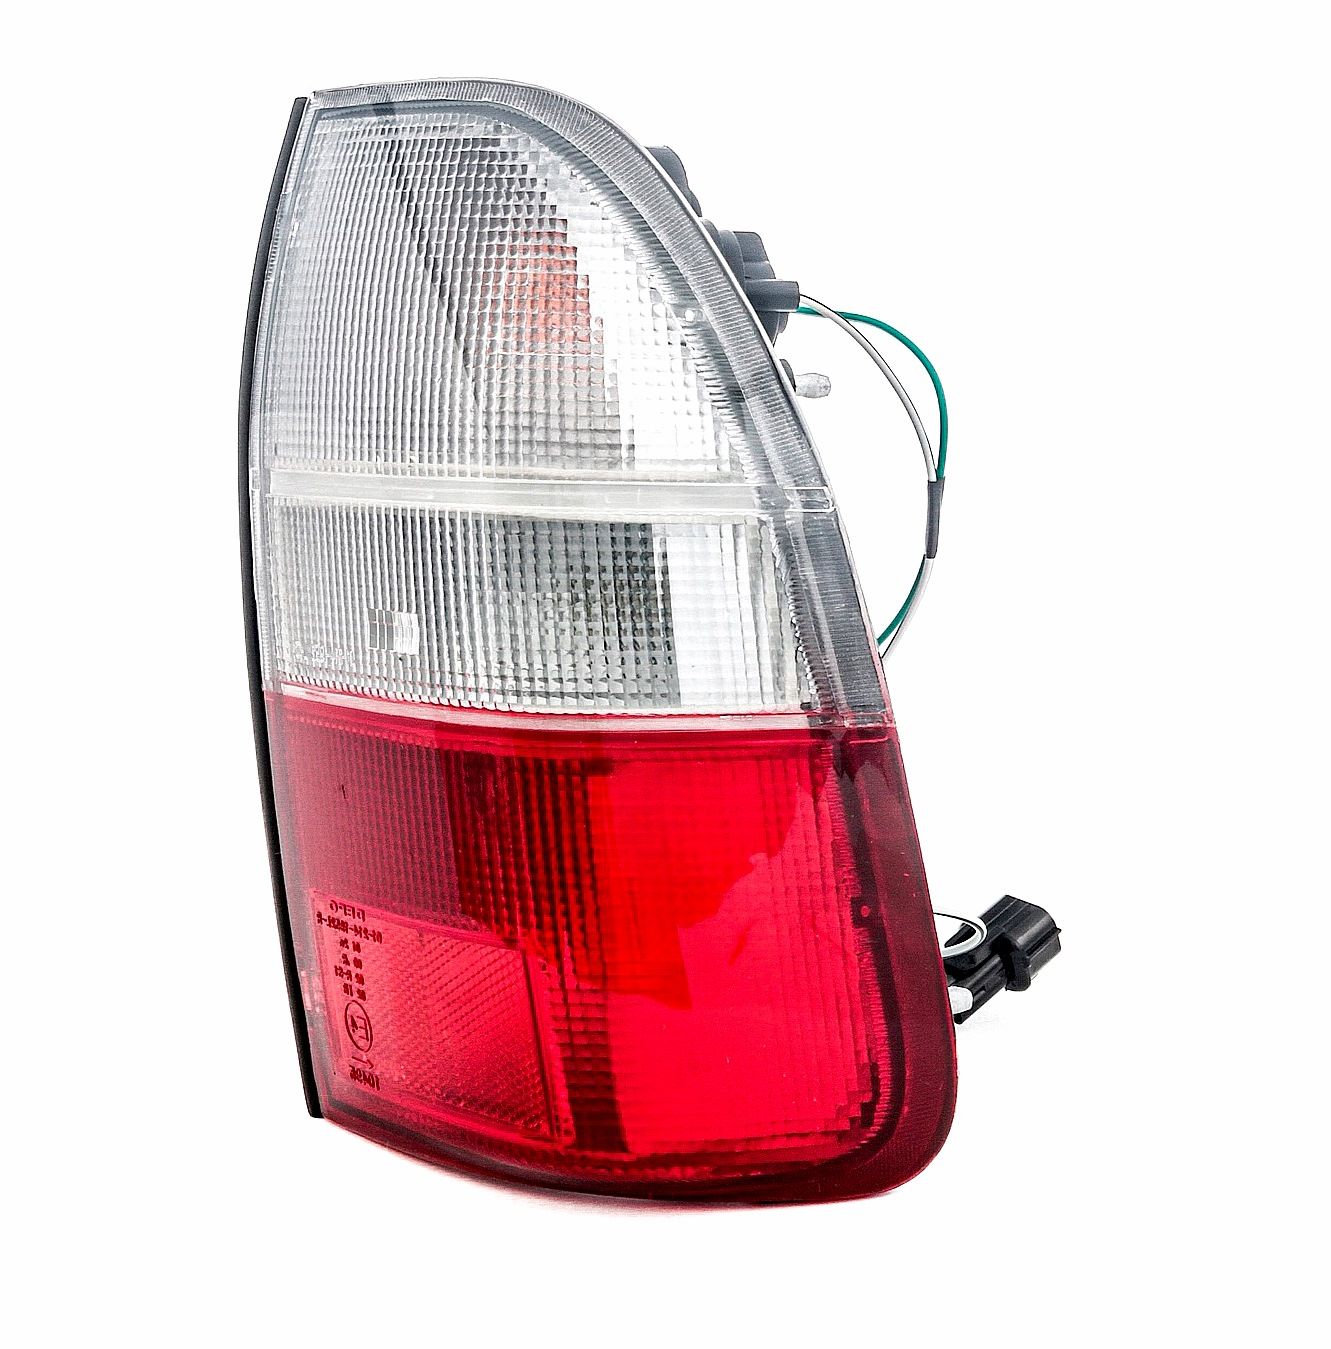 214-1952R-AE-CR ABAKUS Tail lights MITSUBISHI Right, P21W, PY21W, P21/5W, with bulb holder